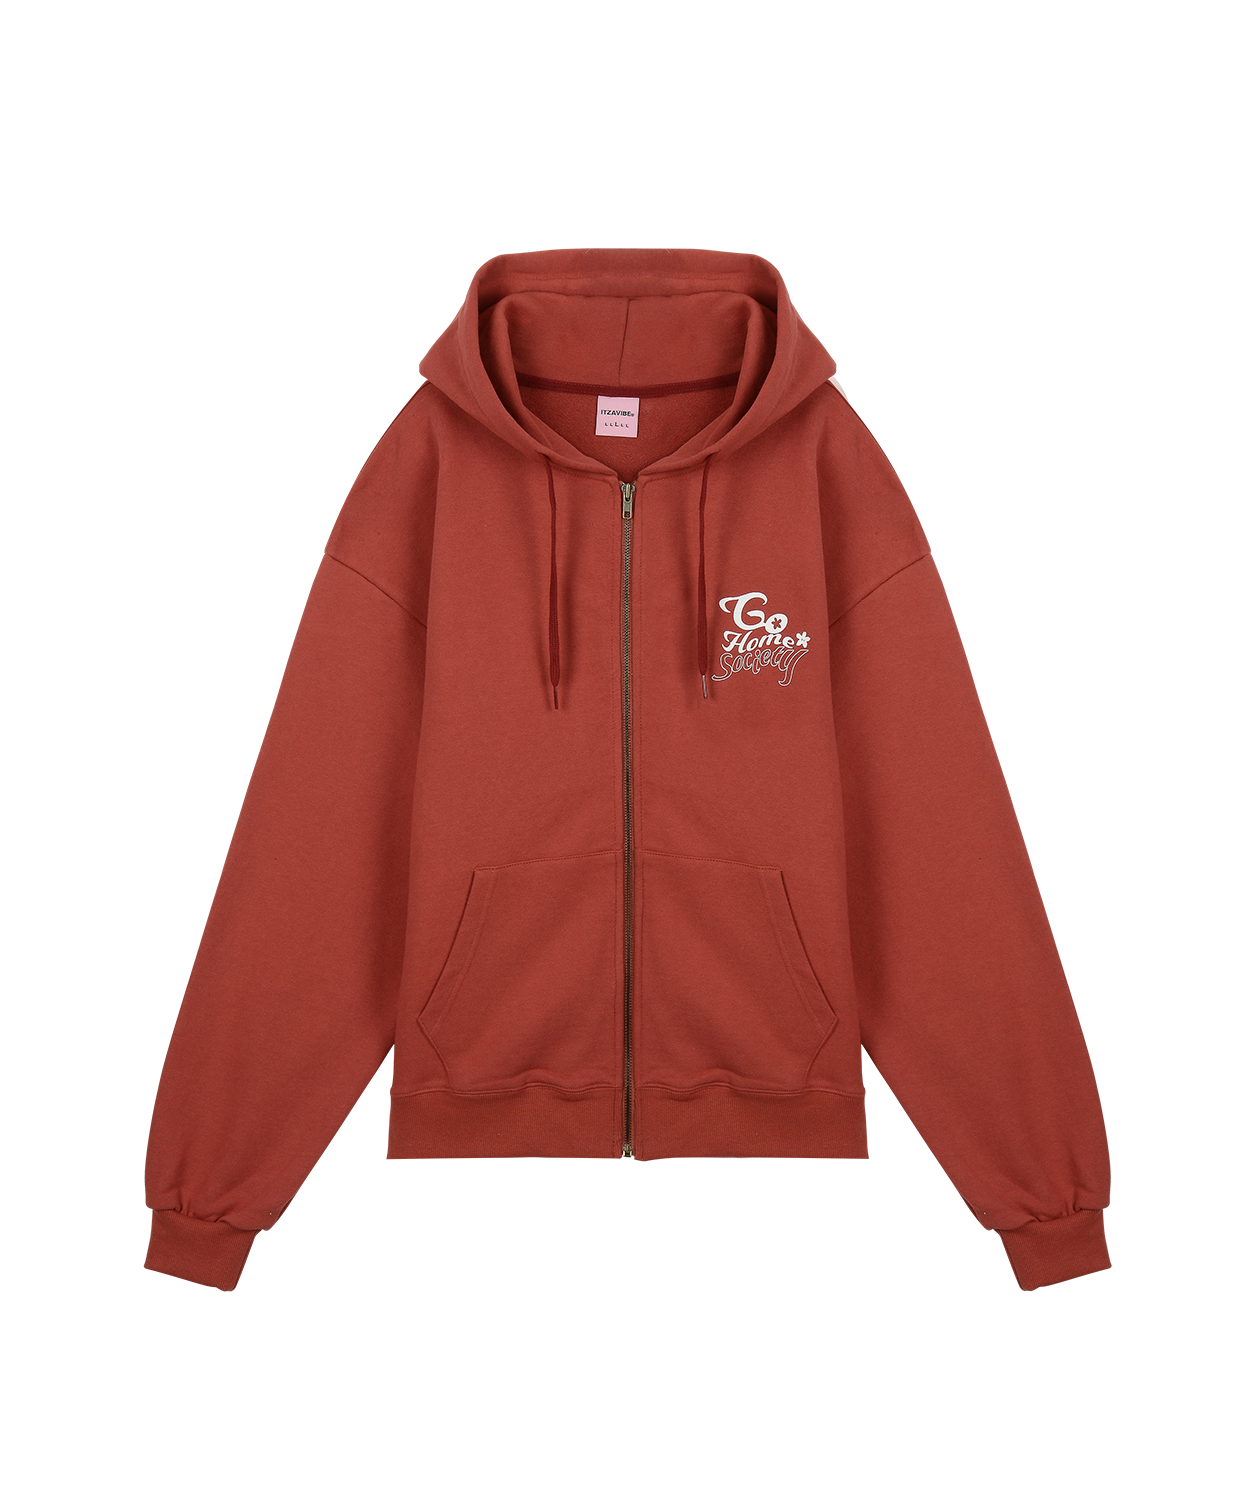 [IBA23UHD17RD] GO HOME SOCIETY ZIP UP - RED